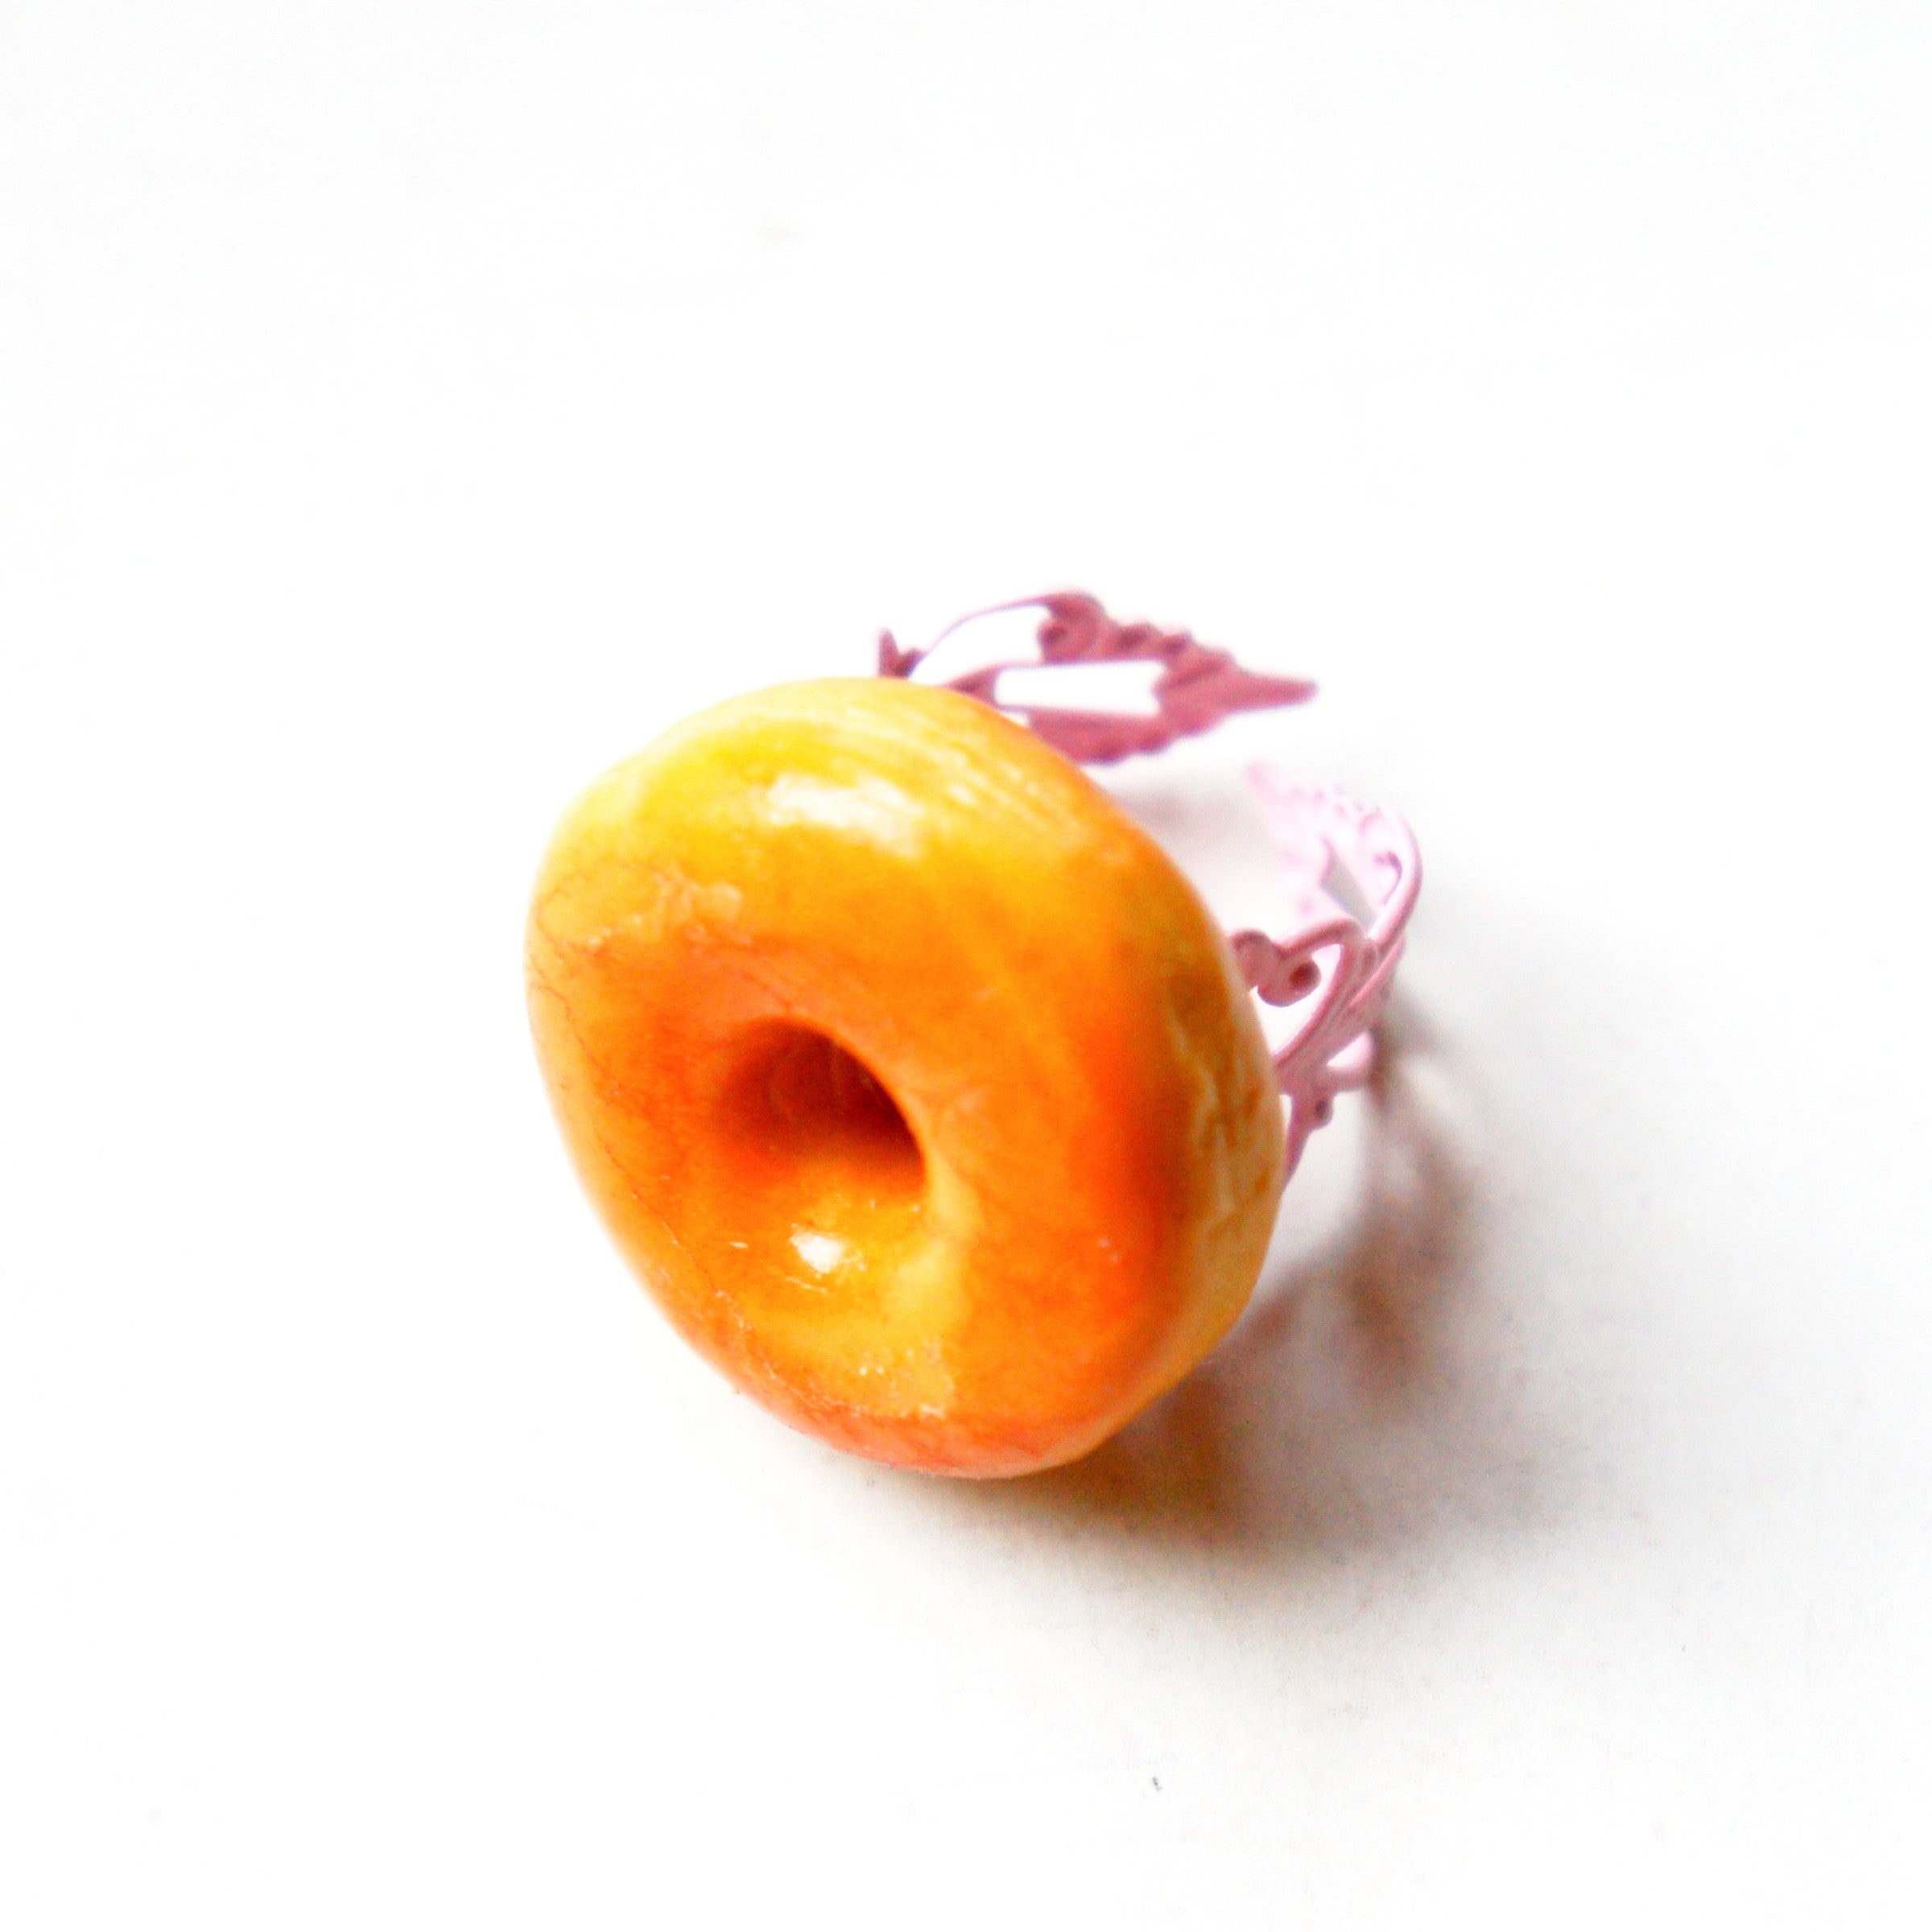 Glazed Donut Ring - Jillicious charms and accessories